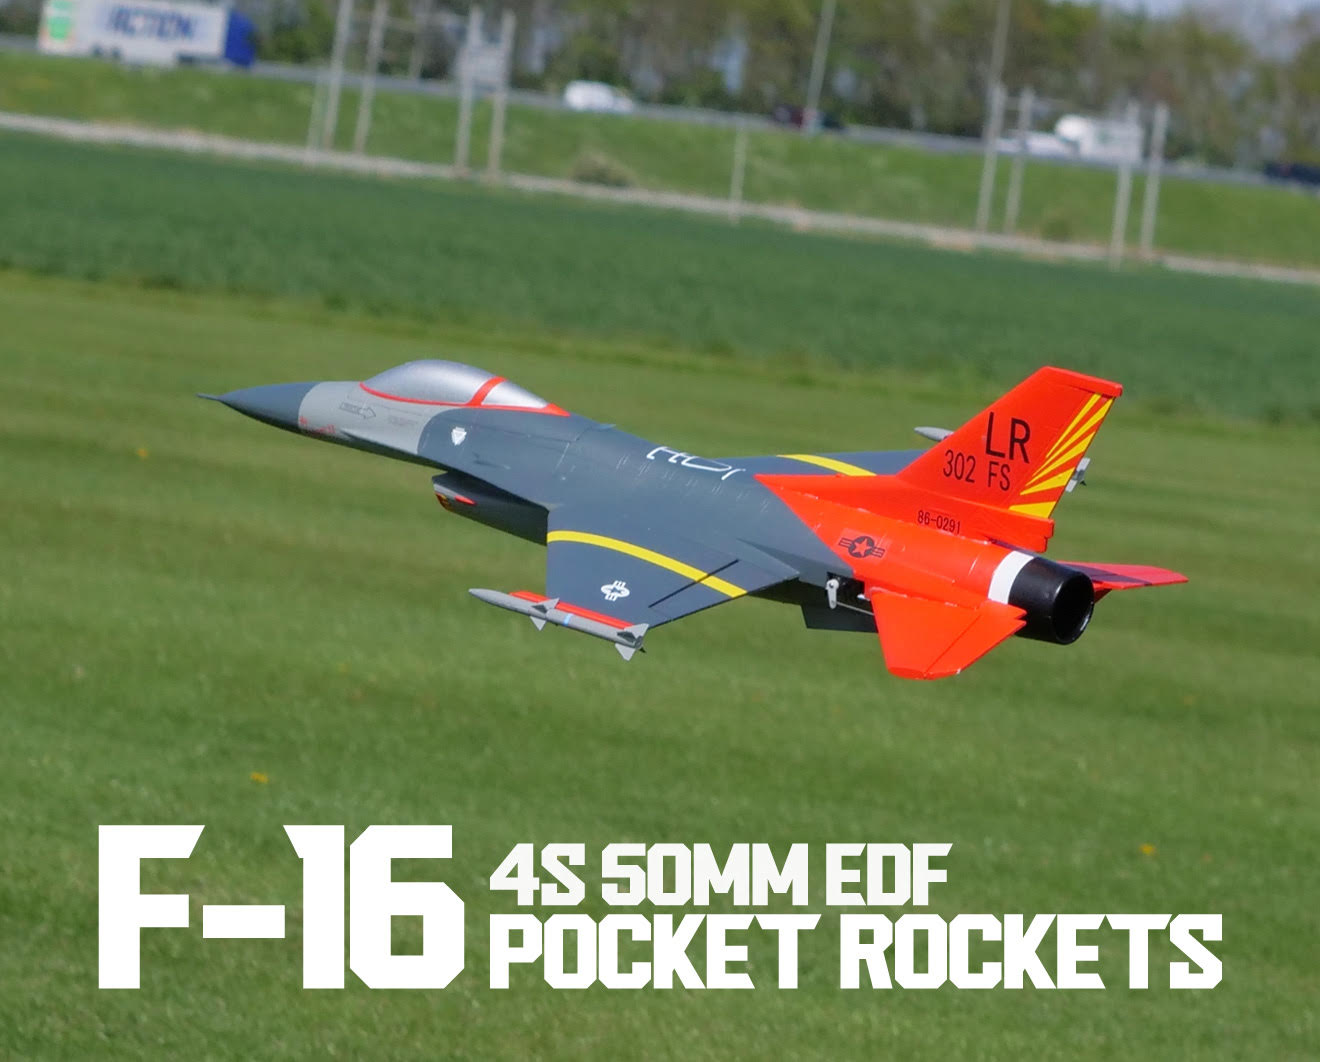 The F-16 is quick, simple to build, with it loads of power!